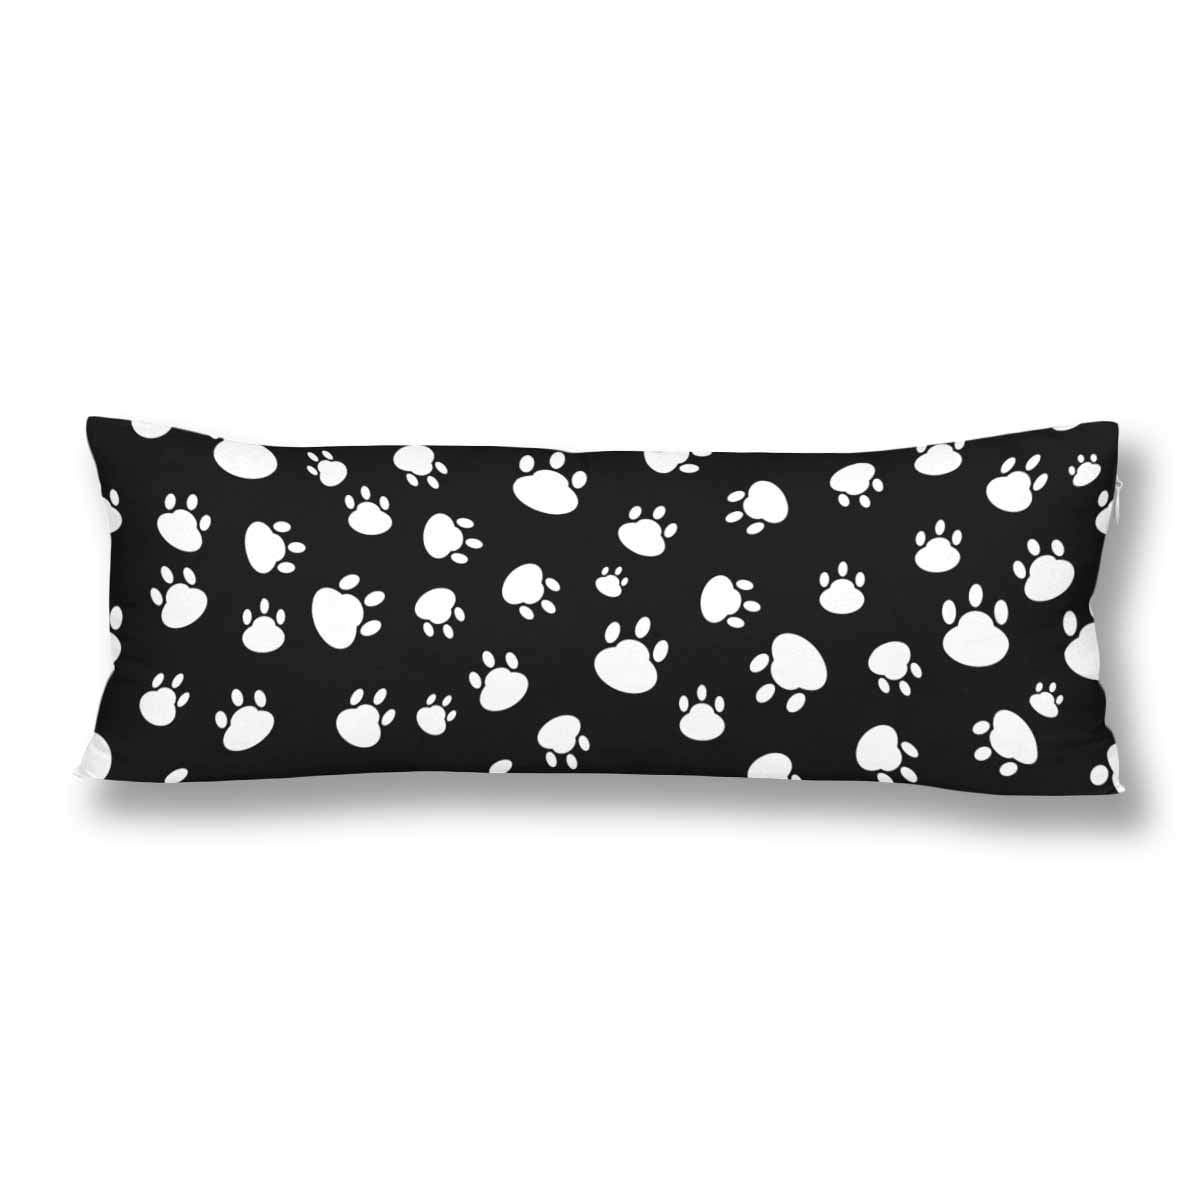 ABPHOTO Animal Paw Print Dog Foot Print Body Pillow Covers Case Pillowcase  20x60 inch Couch 